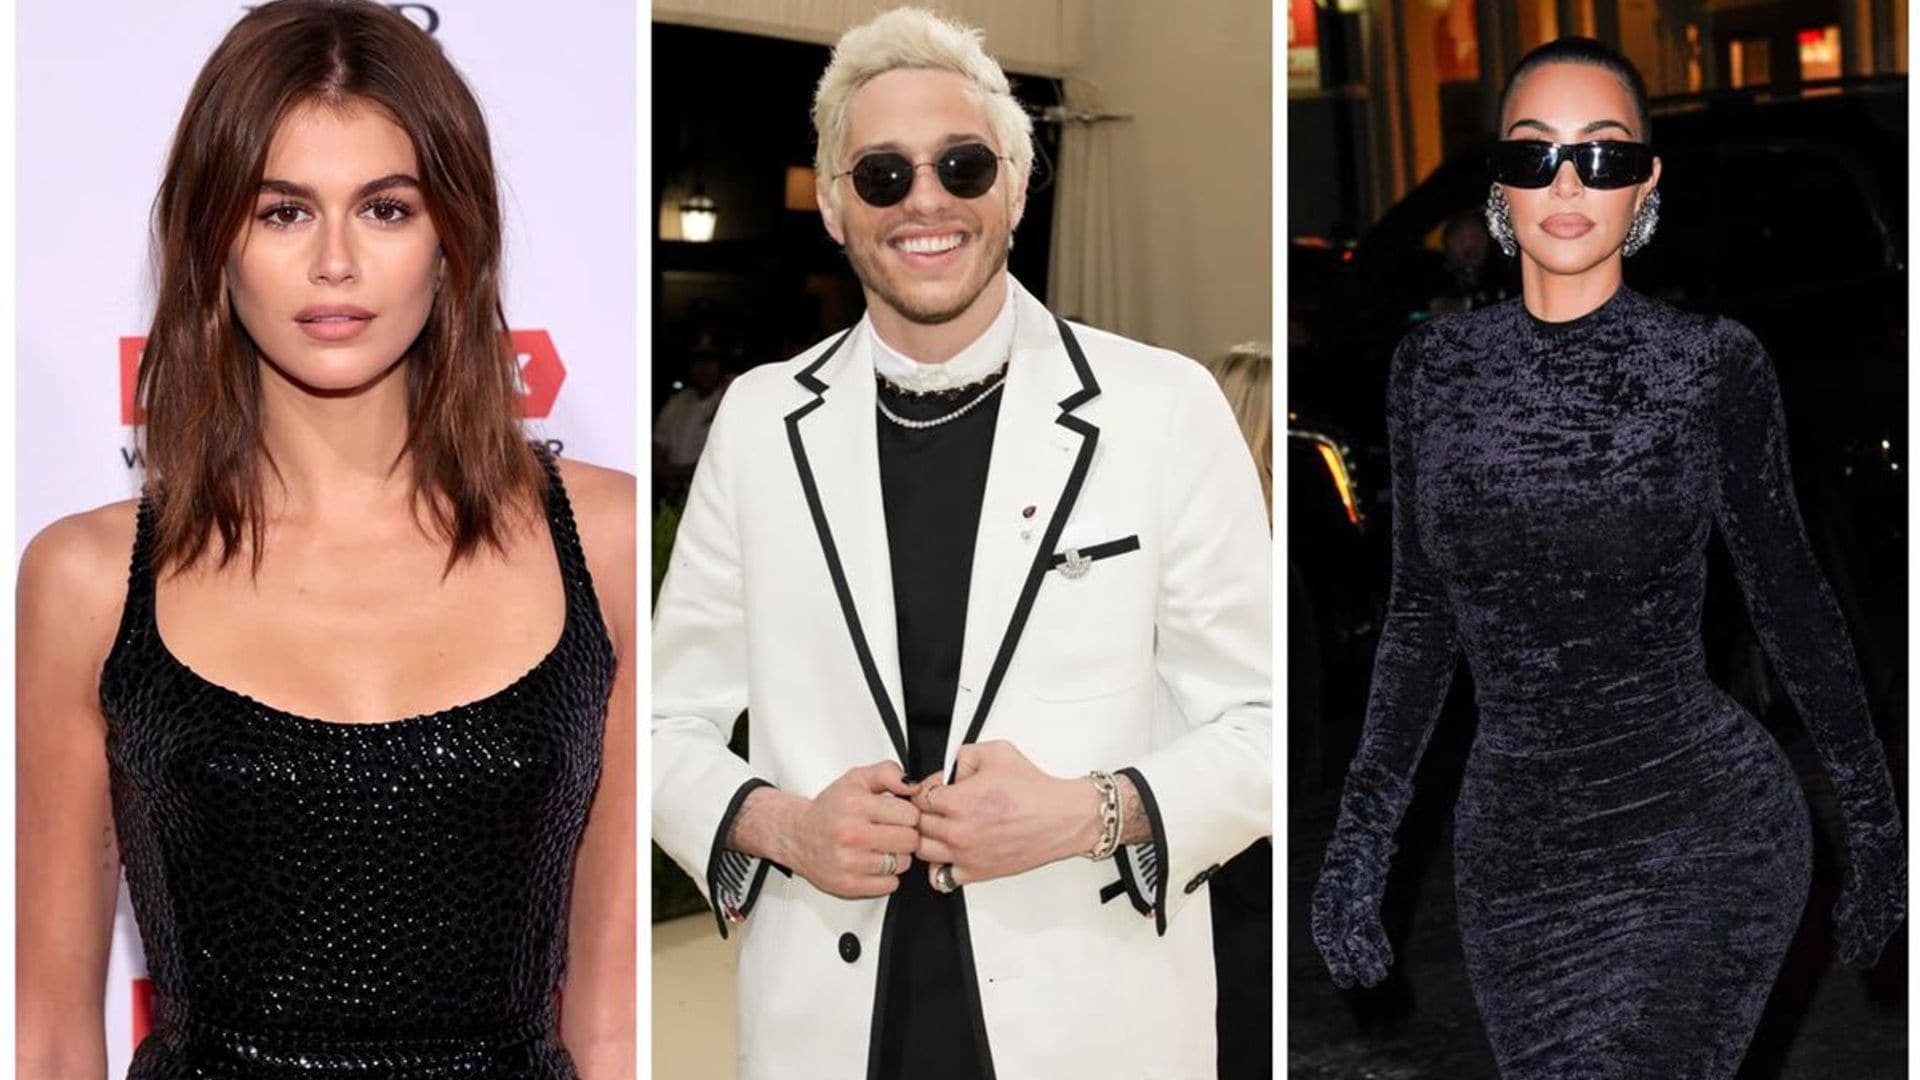 Pete Davidson’s love life: From Kaia Gerber to Kim Kardashian, check out his most notorious relationships